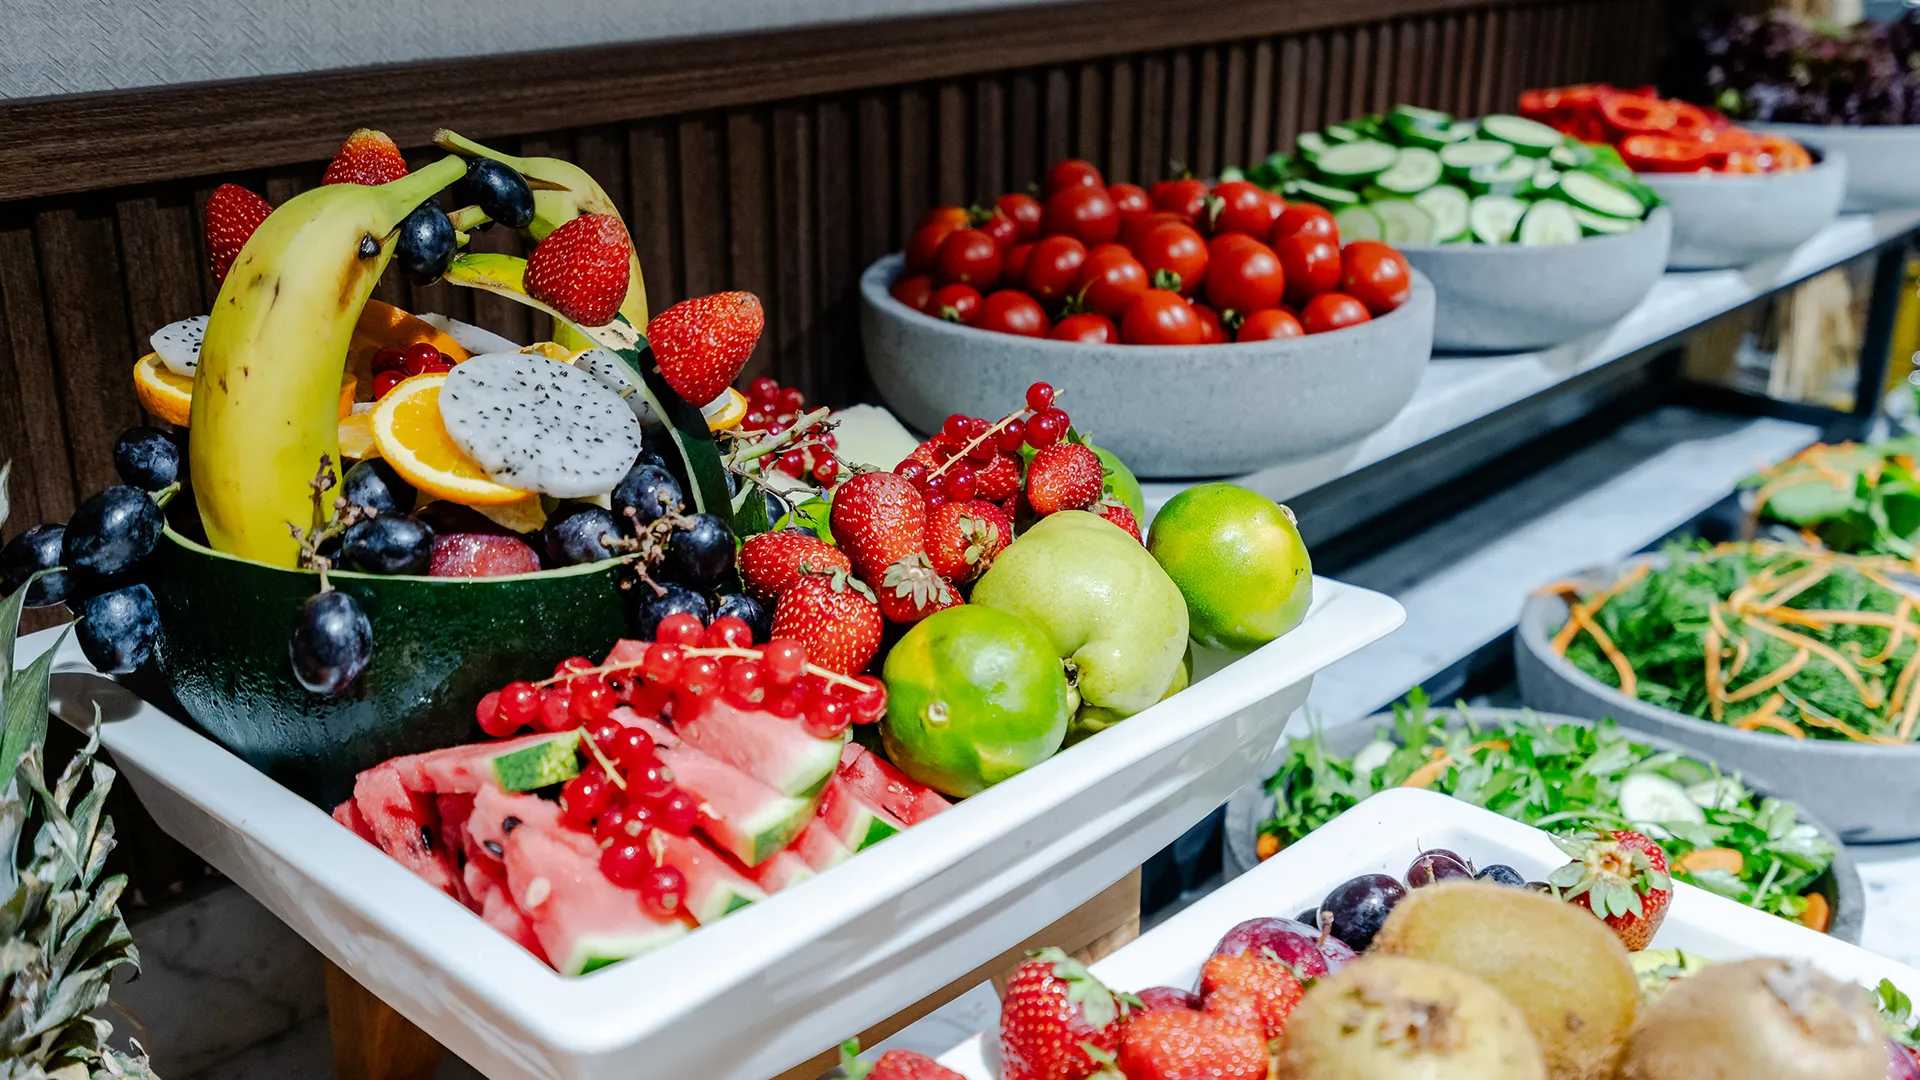 A breakfast buffet with a variety of fruits, including strawberries.